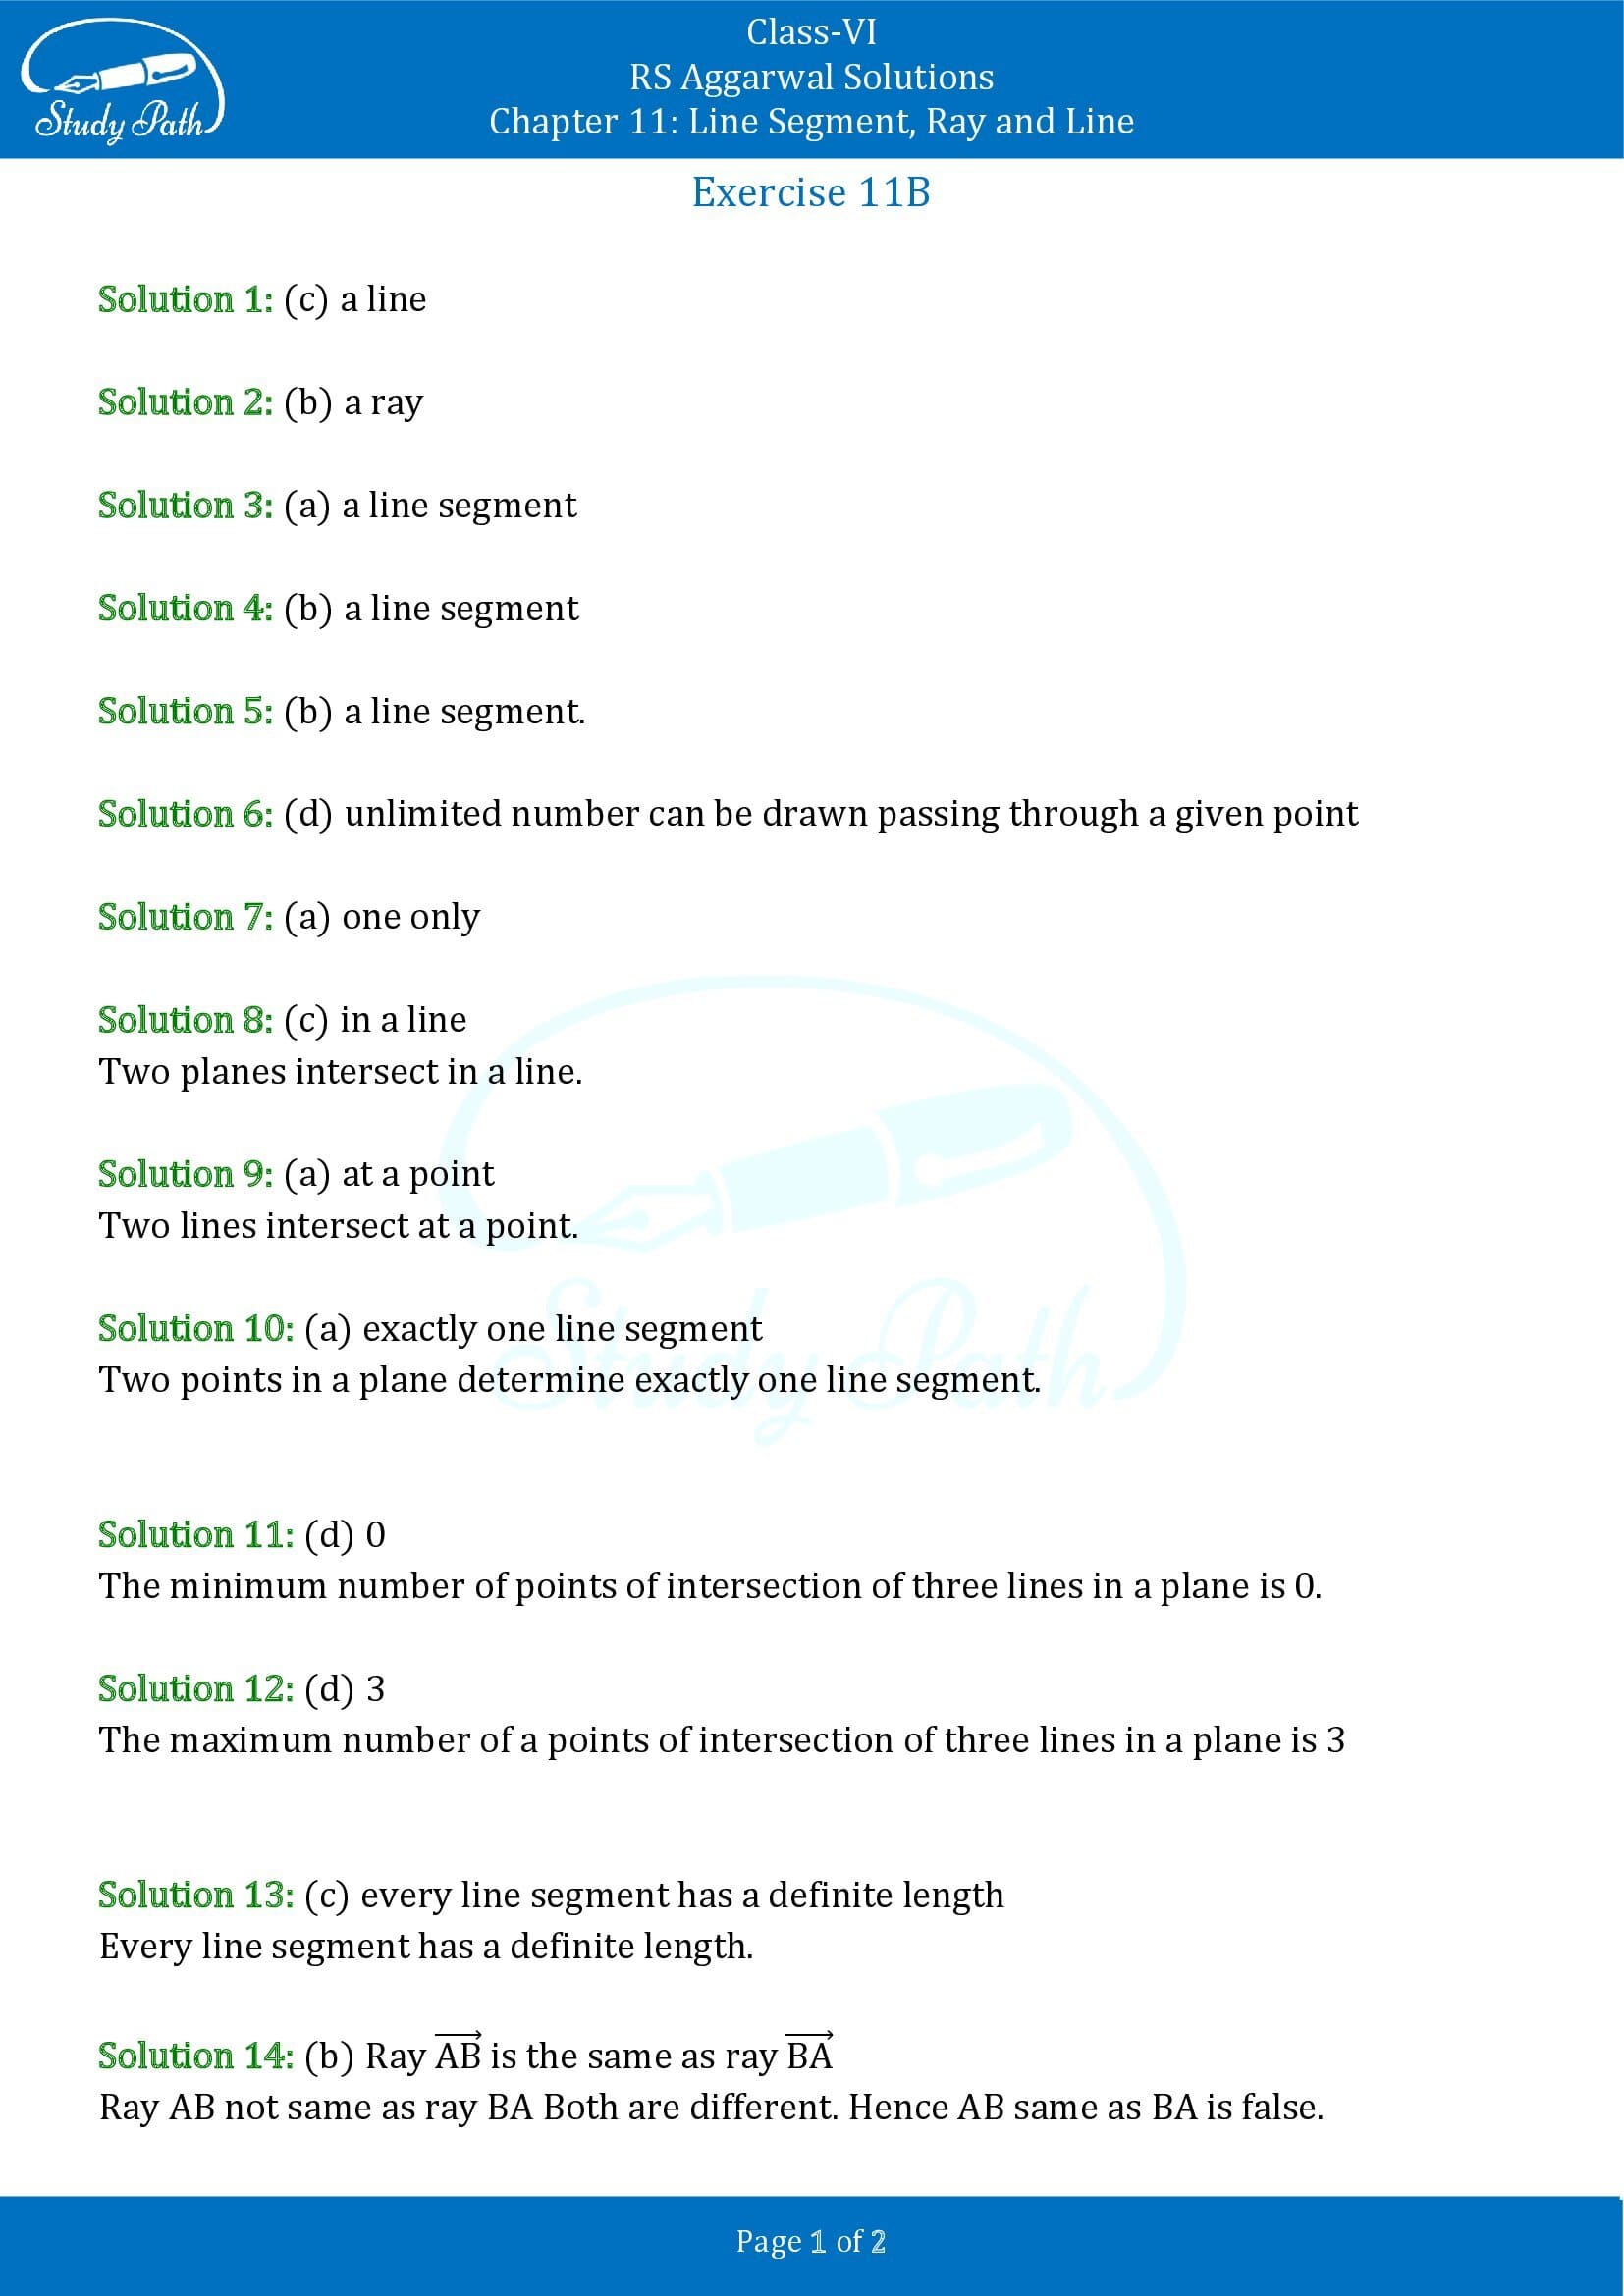 RS Aggarwal Solutions Class 6 Chapter 11 Line Segment Ray and Line Exercise 11B MCQs 0001